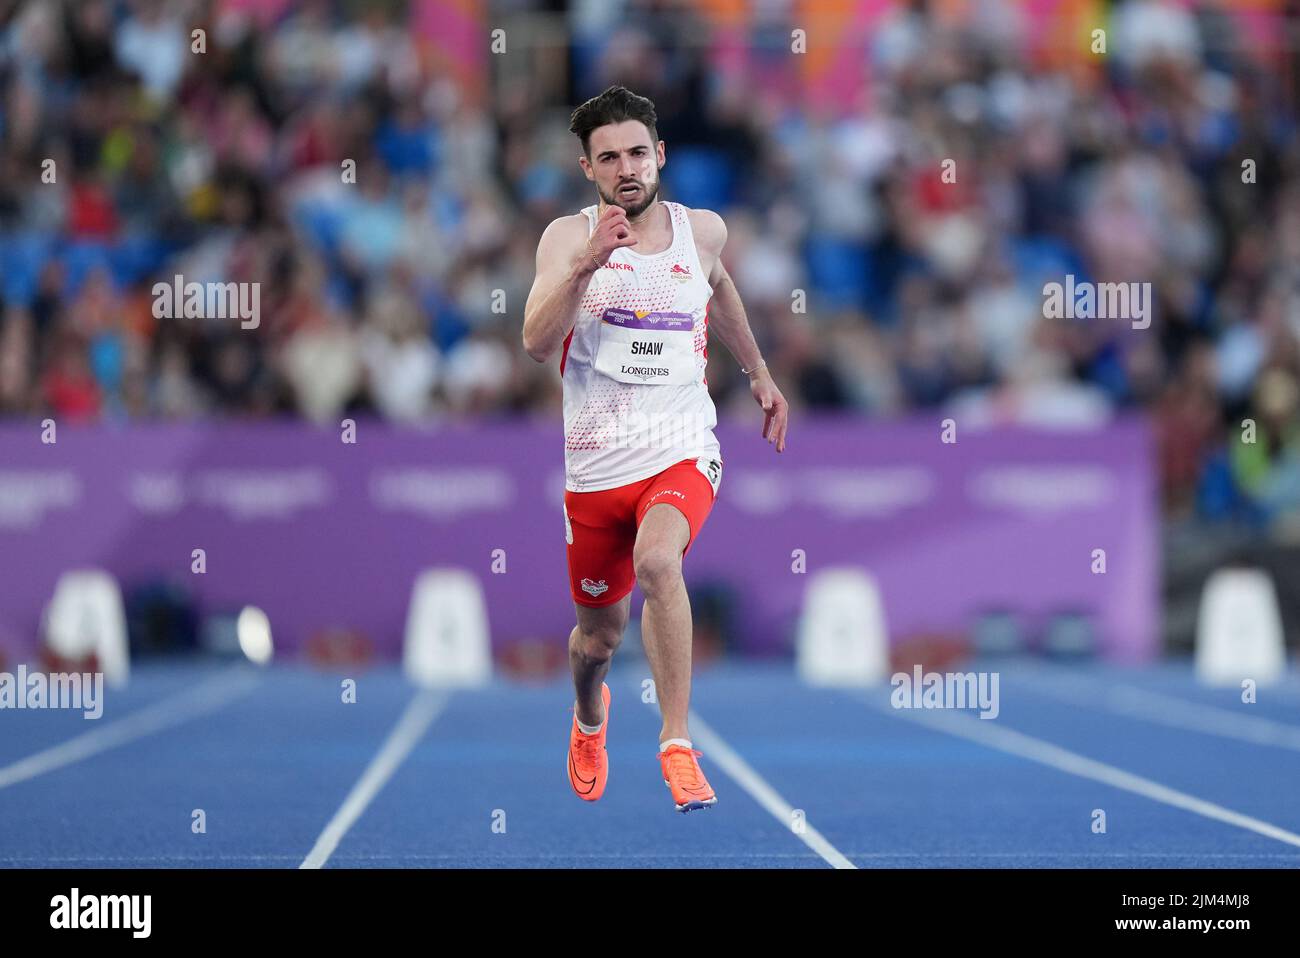 England's Zachary Alexander Shaw coming home to take silver in the Men's T11/12 100m Final at Alexander Stadium on day seven of the 2022 Commonwealth Games in Birmingham. Picture date: Thursday August 4, 2022. Stock Photo